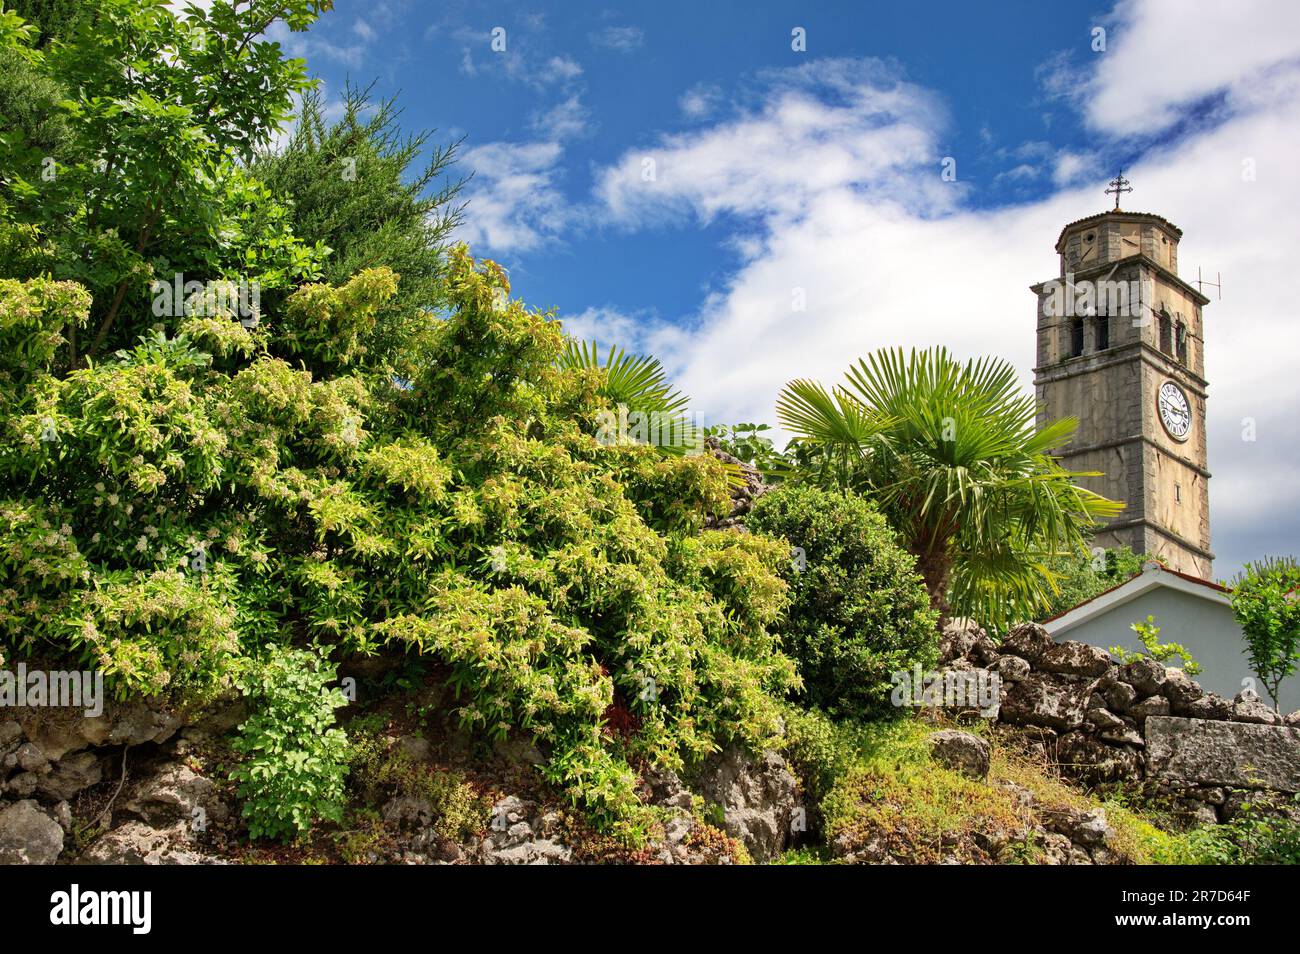 The old church bell tower behind the stone wall overgrown with greenery Stock Photo